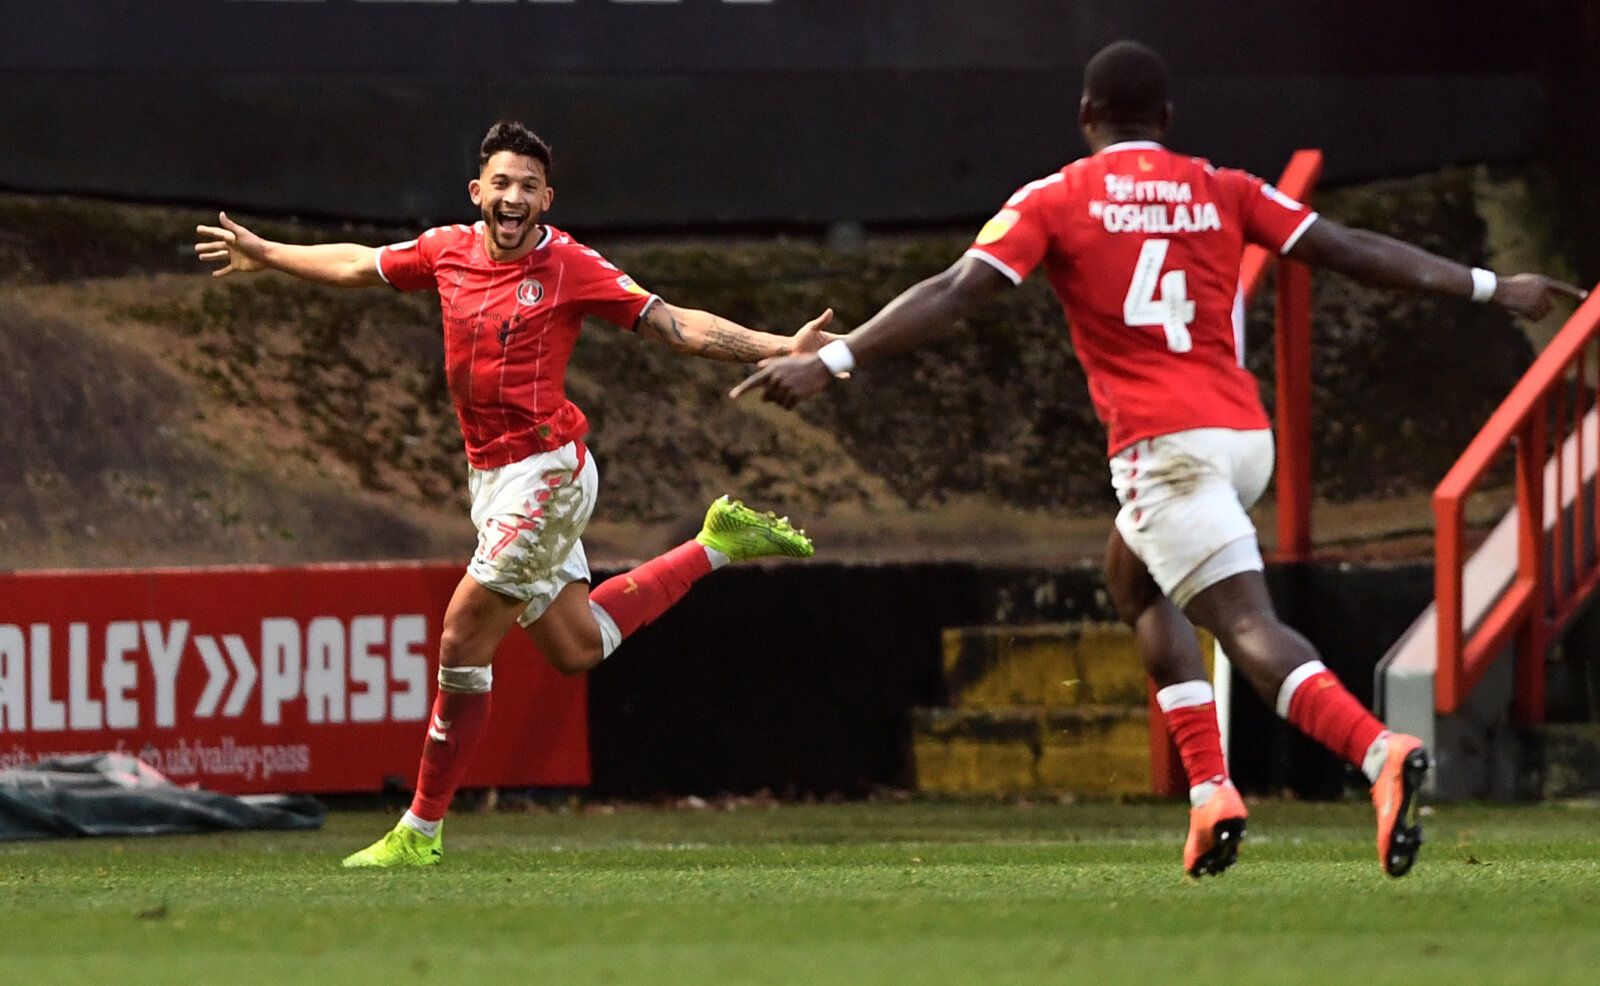 Soccer Football - Championship - Charlton Athletic v Bristol City - The Valley, London, Britain - December 26, 2019  Charlton's Macauley Bonne celebrates scoring their first goal  Action Images/Tony O'Brien  EDITORIAL USE ONLY. No use with unauthorized audio, video, data, fixture lists, club/league logos or 